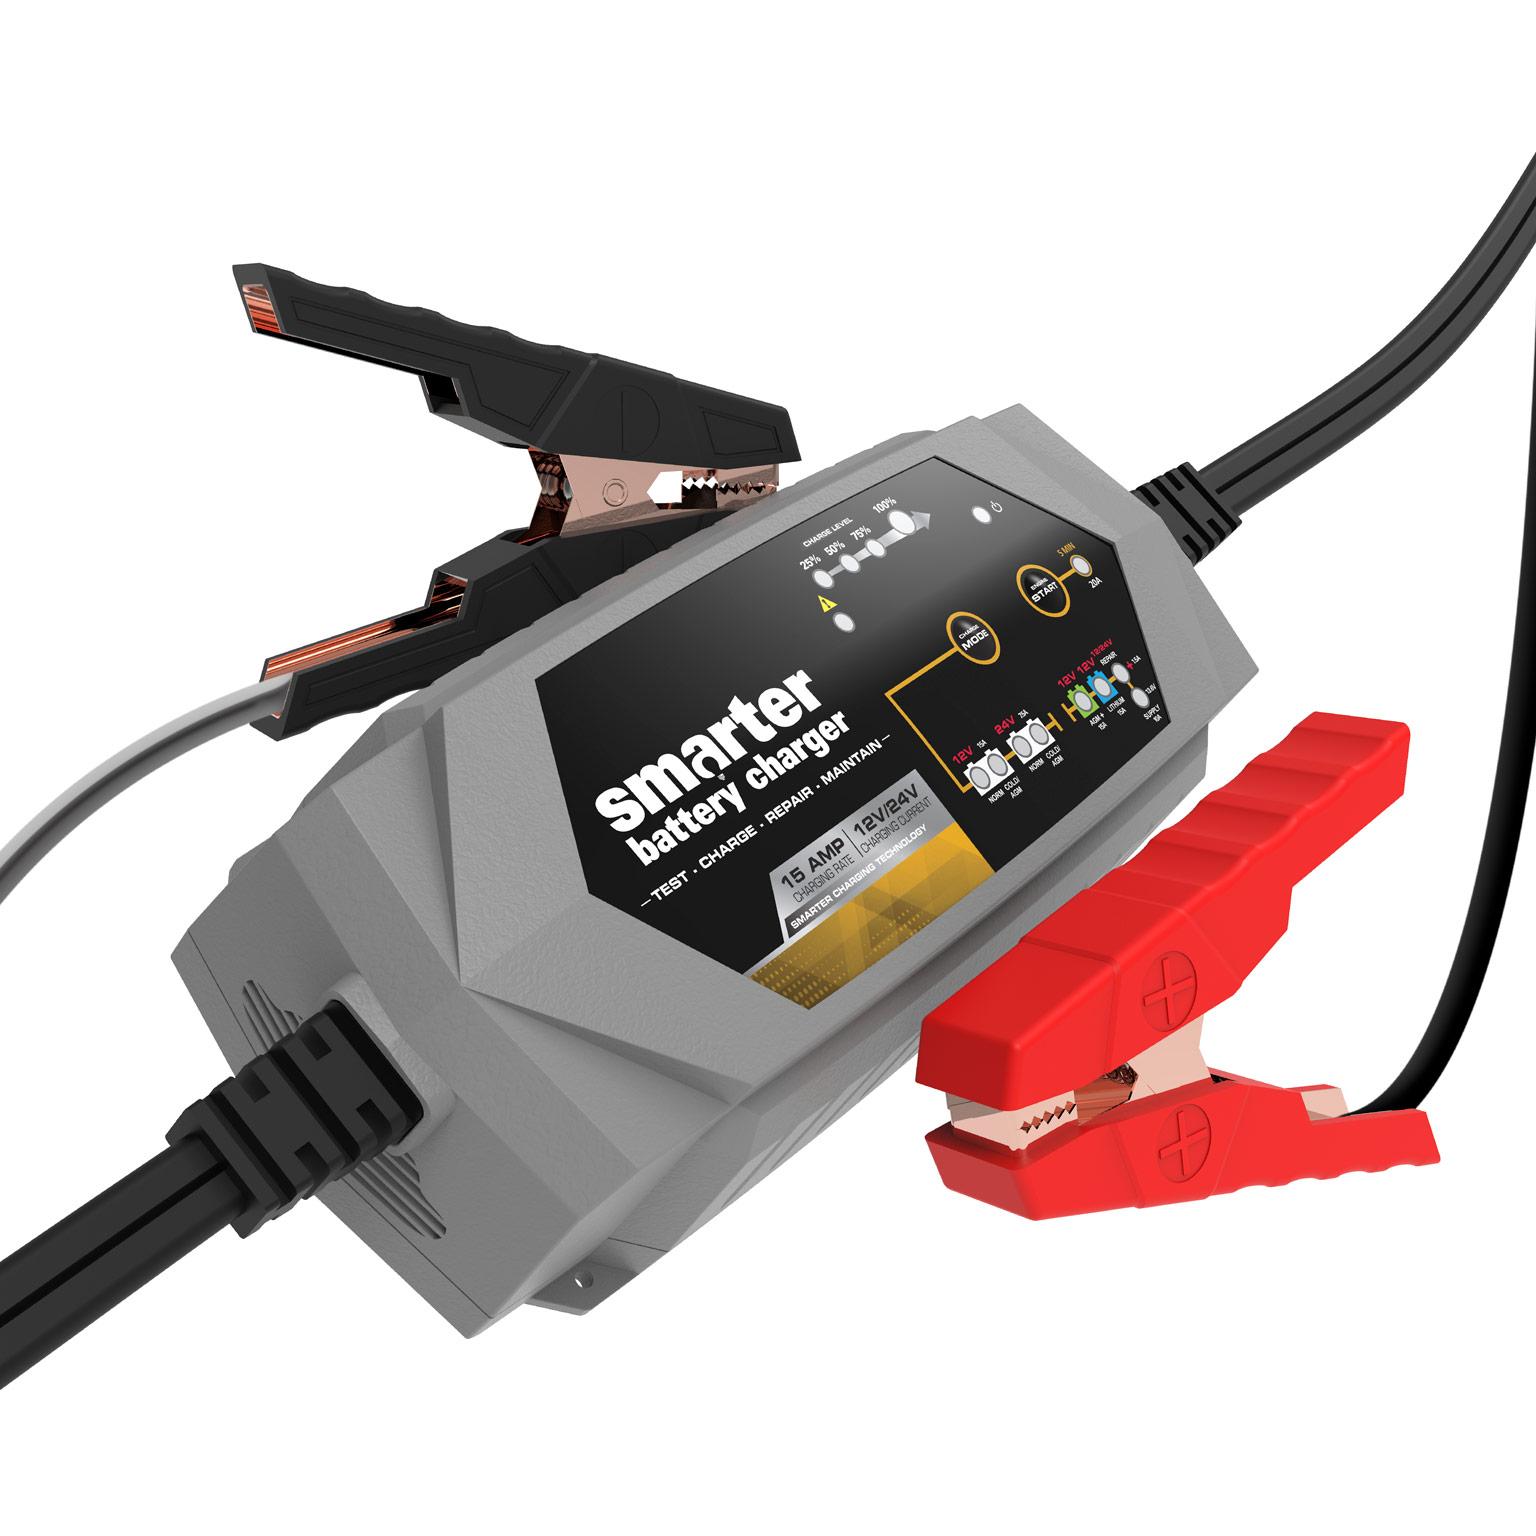 Battery charger 12V / 15A 2 outputs